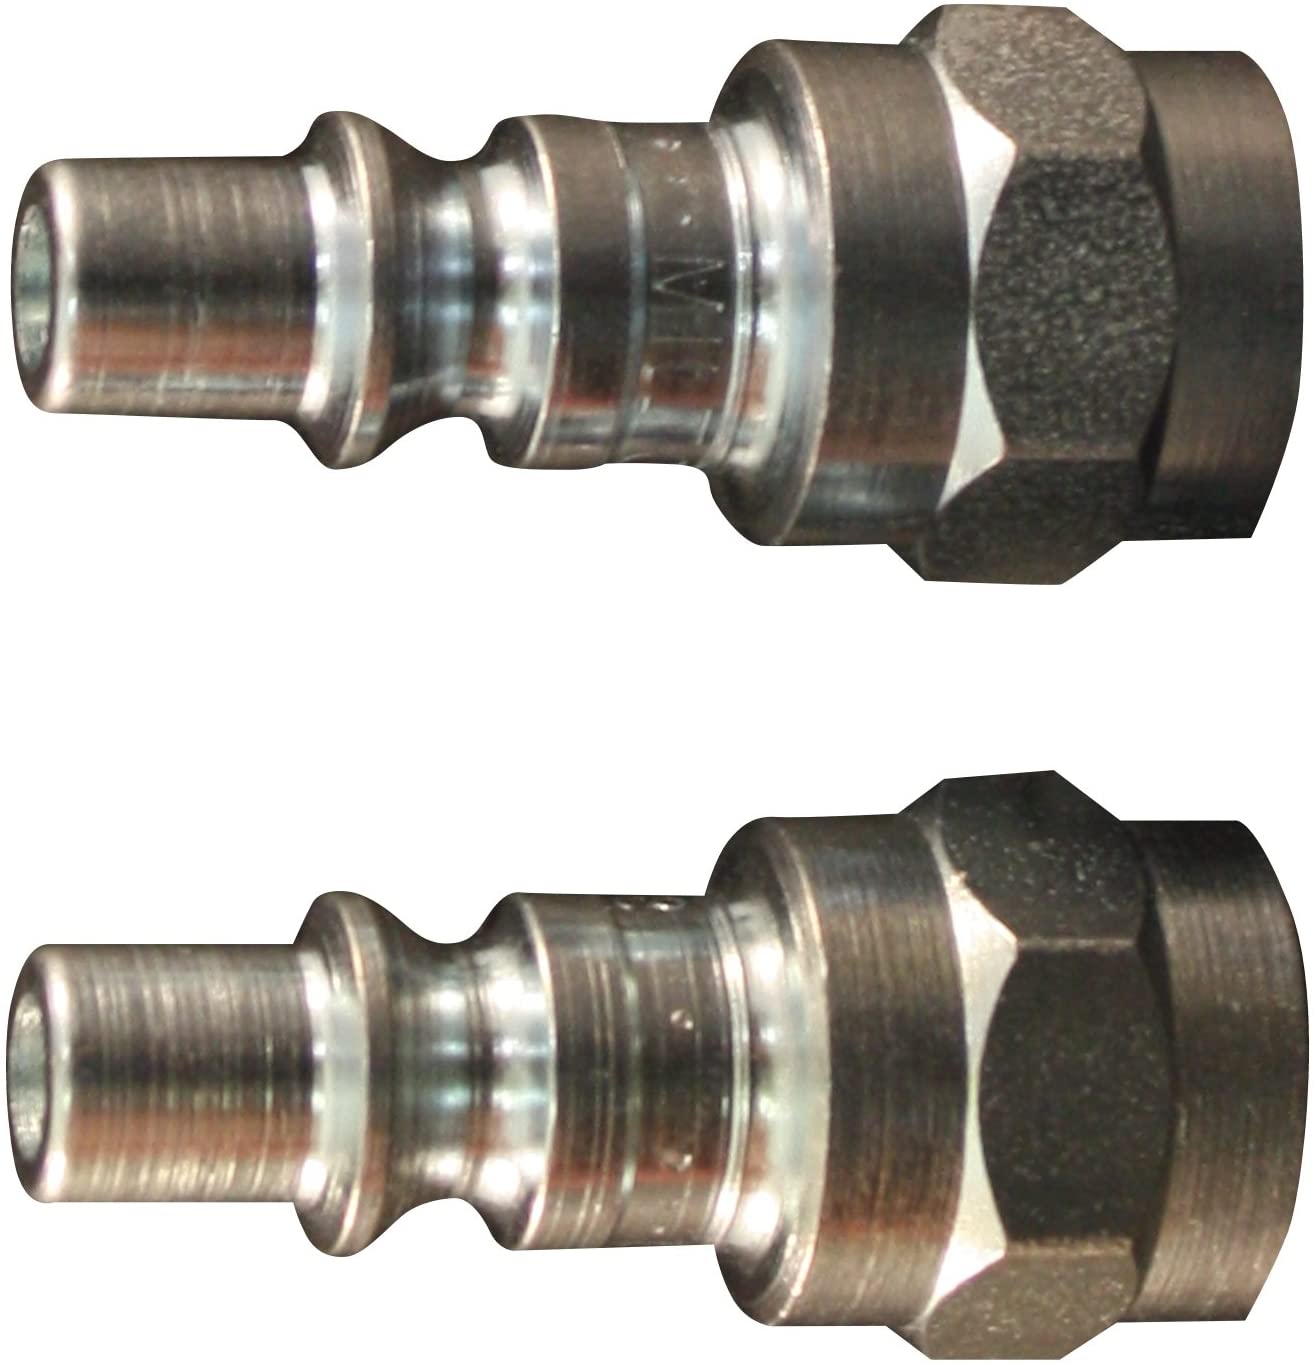 Milton S-778 1/4" FNPT A Style Plug  - Pack of 2 - MPR Tools & Equipment